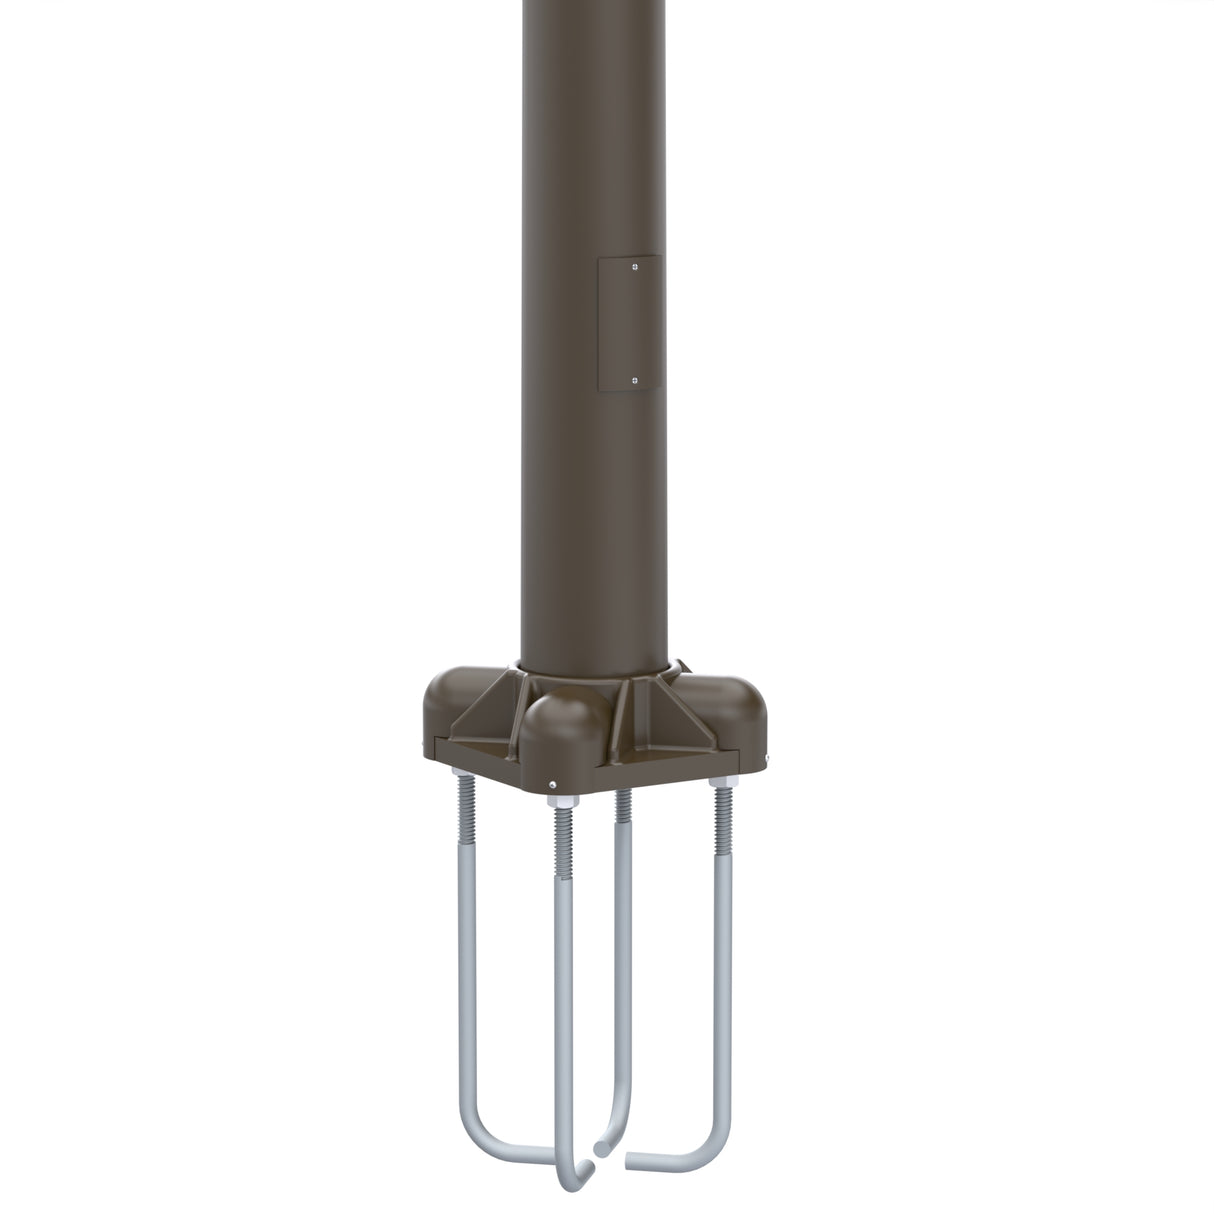 35' Tall x 8.0" Base OD x 4.5" Top OD x 0.250" Thick, Round Tapered Aluminum, Anchor Base Light Pole